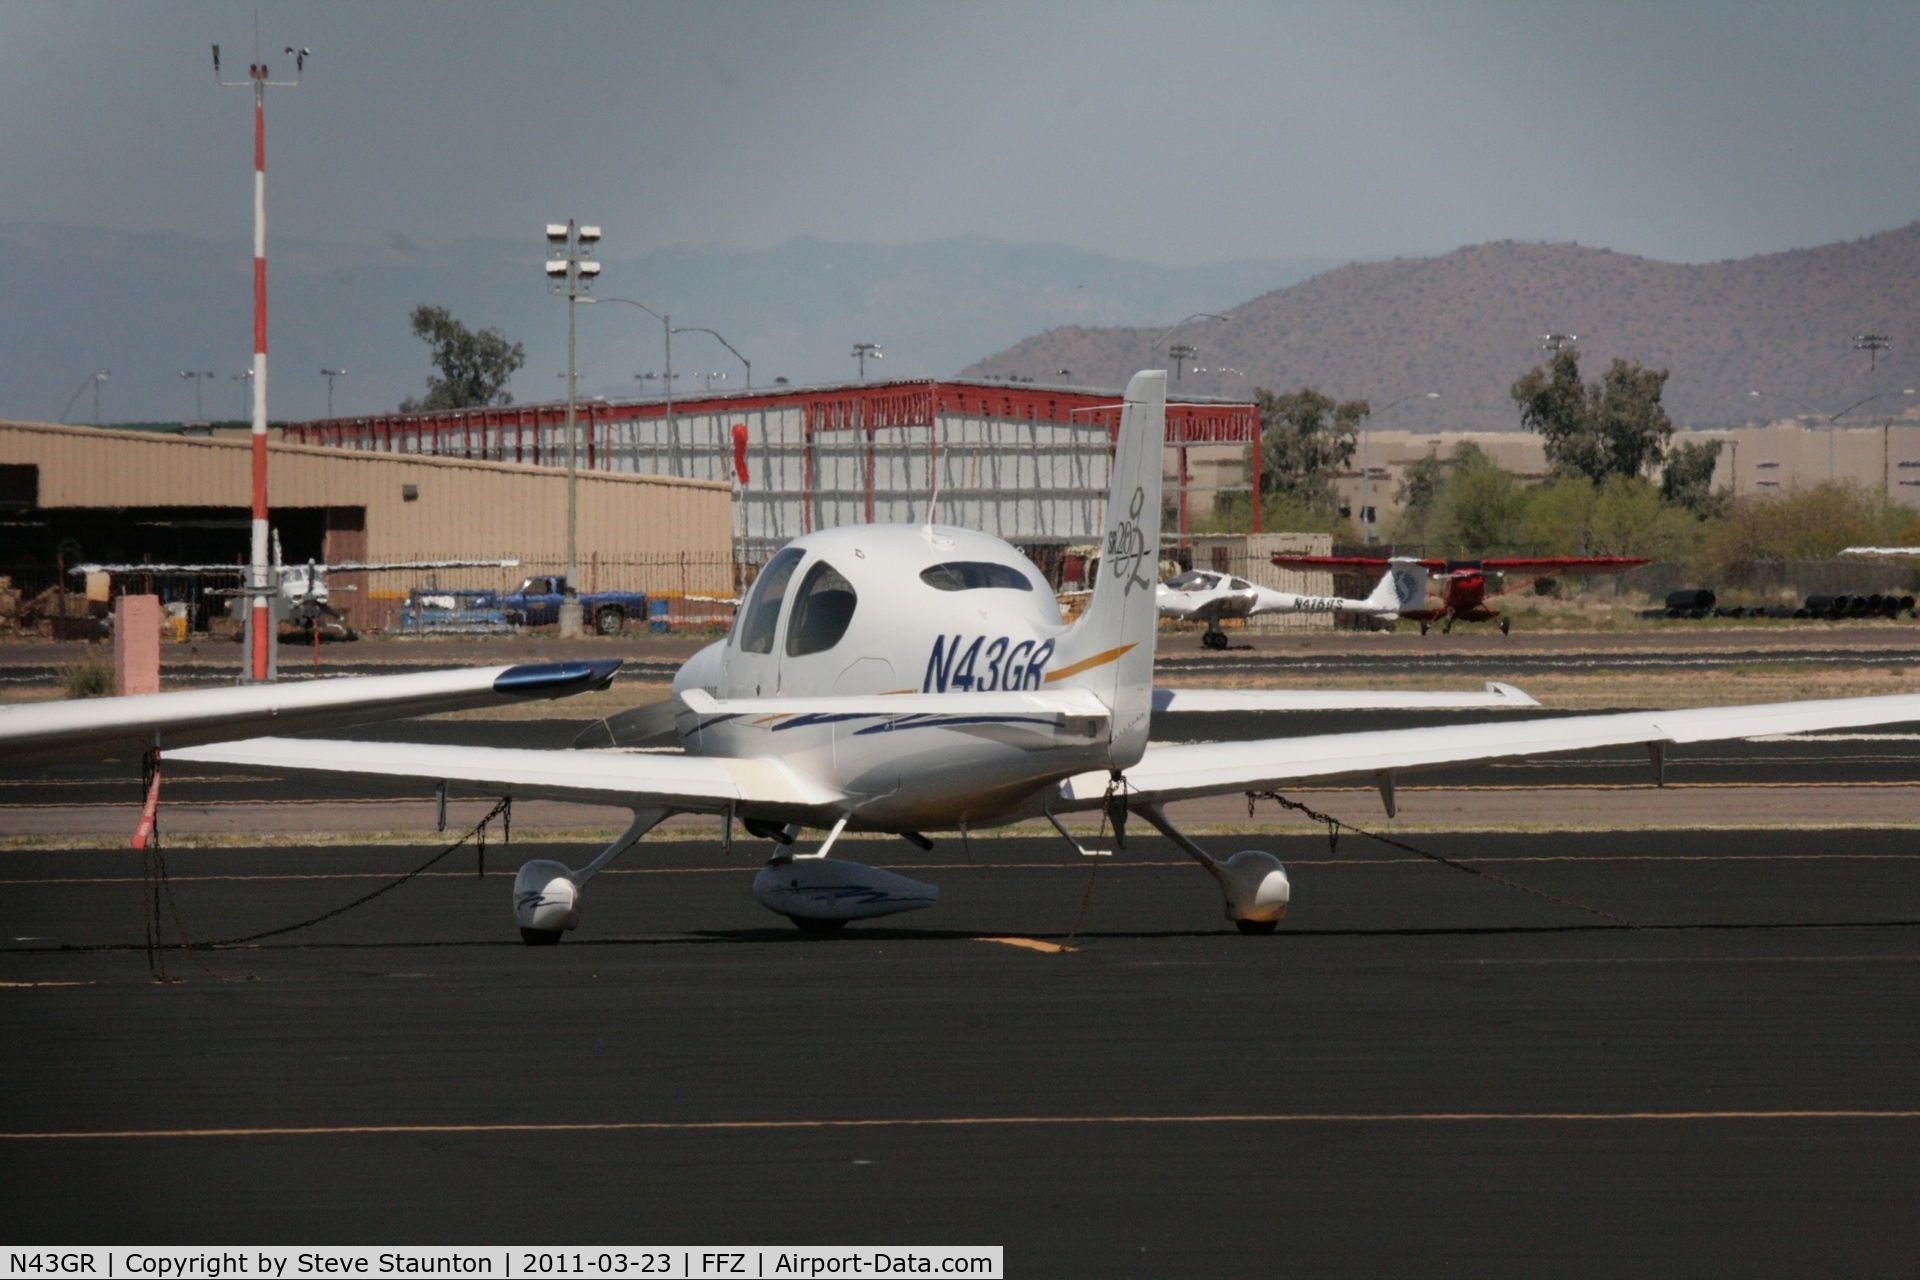 N43GR, 2005 Cirrus SR20 C/N 1531, Taken at Falcon Field Airport, in March 2011 whilst on an Aeroprint Aviation tour